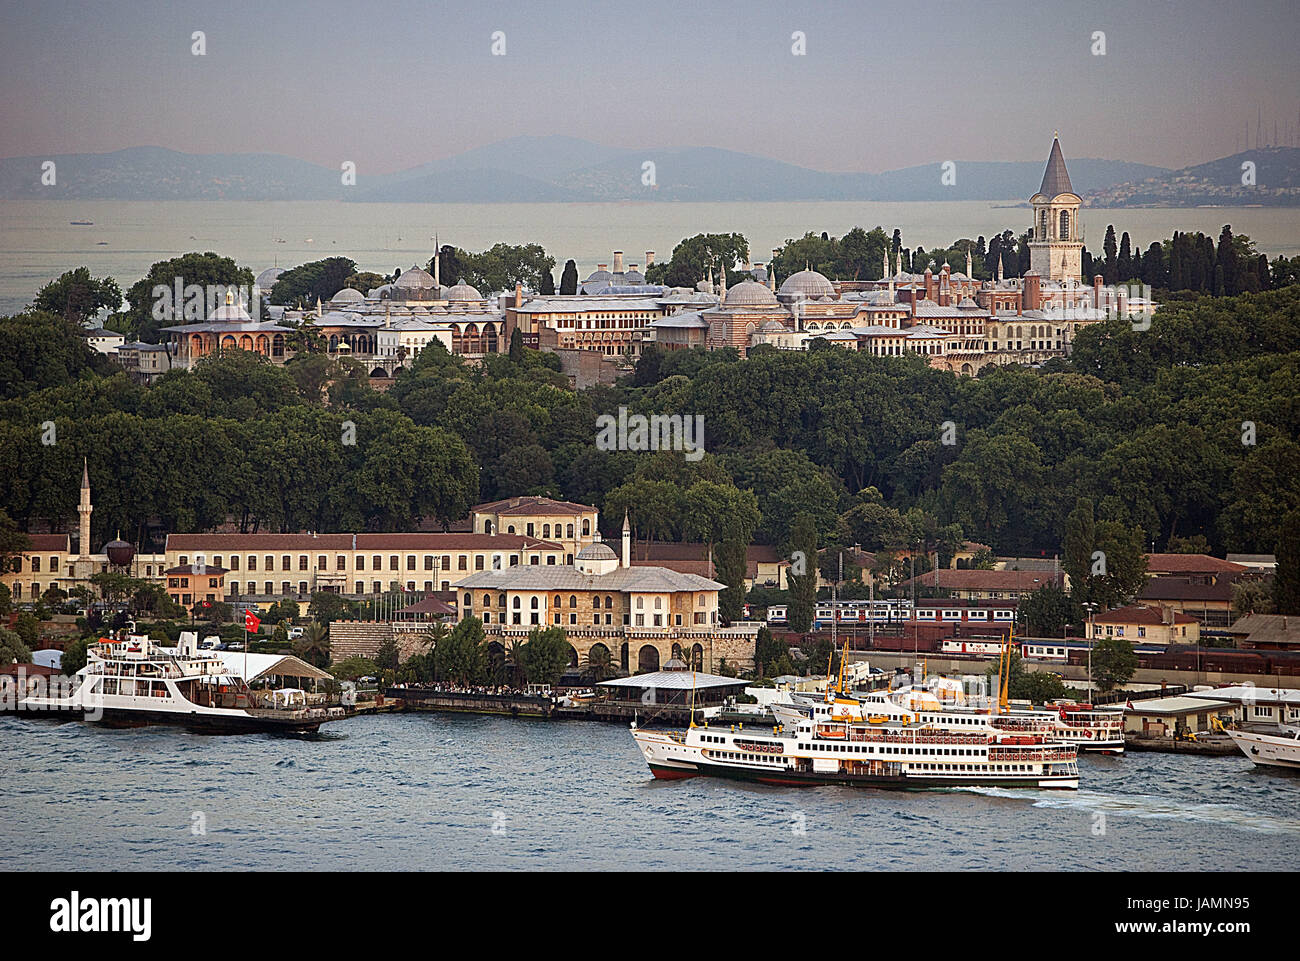 Turkey,Istanbul,town view,Topkapi palace,'the Golden Horn',evening,ships,town,city,metropolis,port,culture,input,gate,place of interest,person,tourism,towers,architecture,museum,palace building,houses,residential houses,hotels,the Bosporus,sea,navigation,tourism, Stock Photo